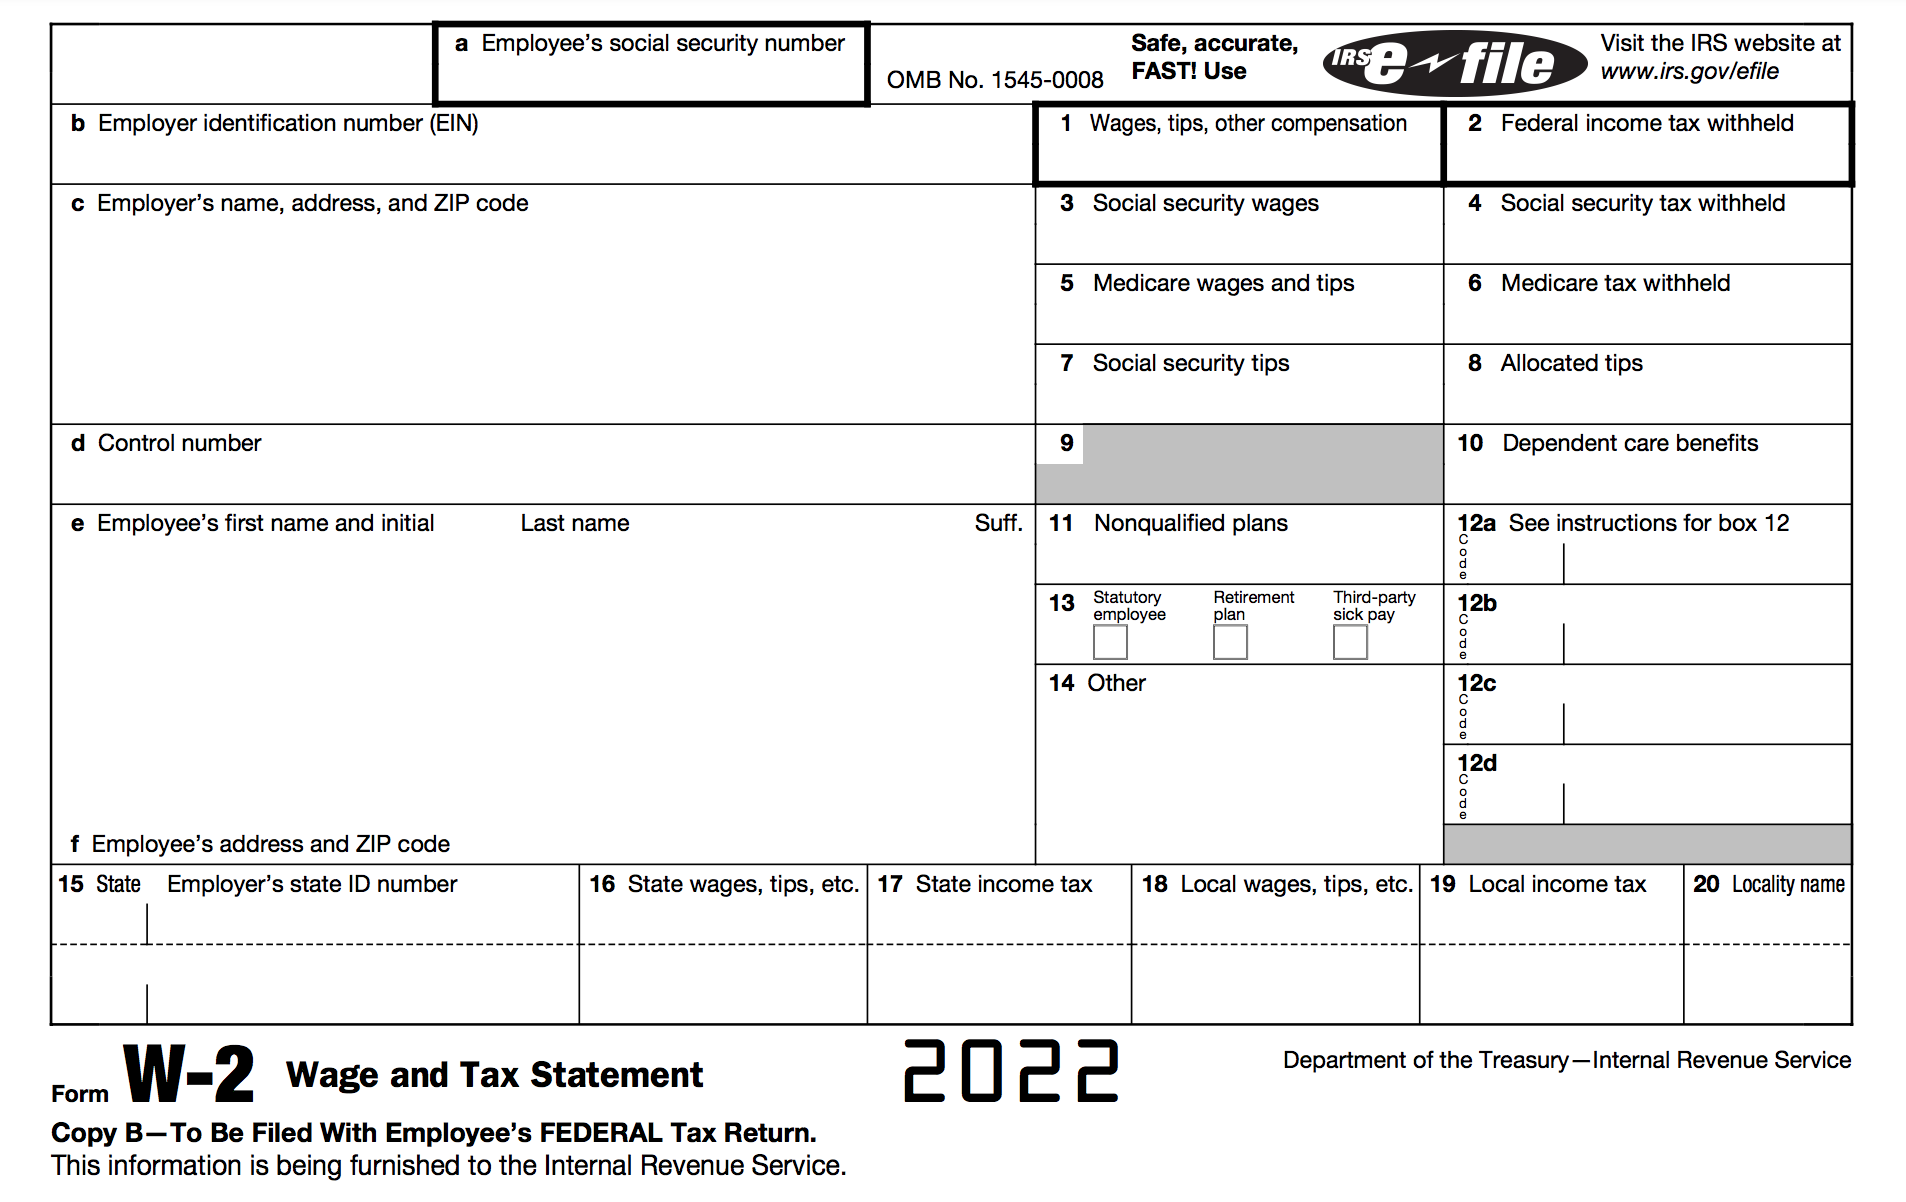 How To Fill Out A W-2 Tax Form | Smartasset pertaining to How To Fill Out W2 Form If Single